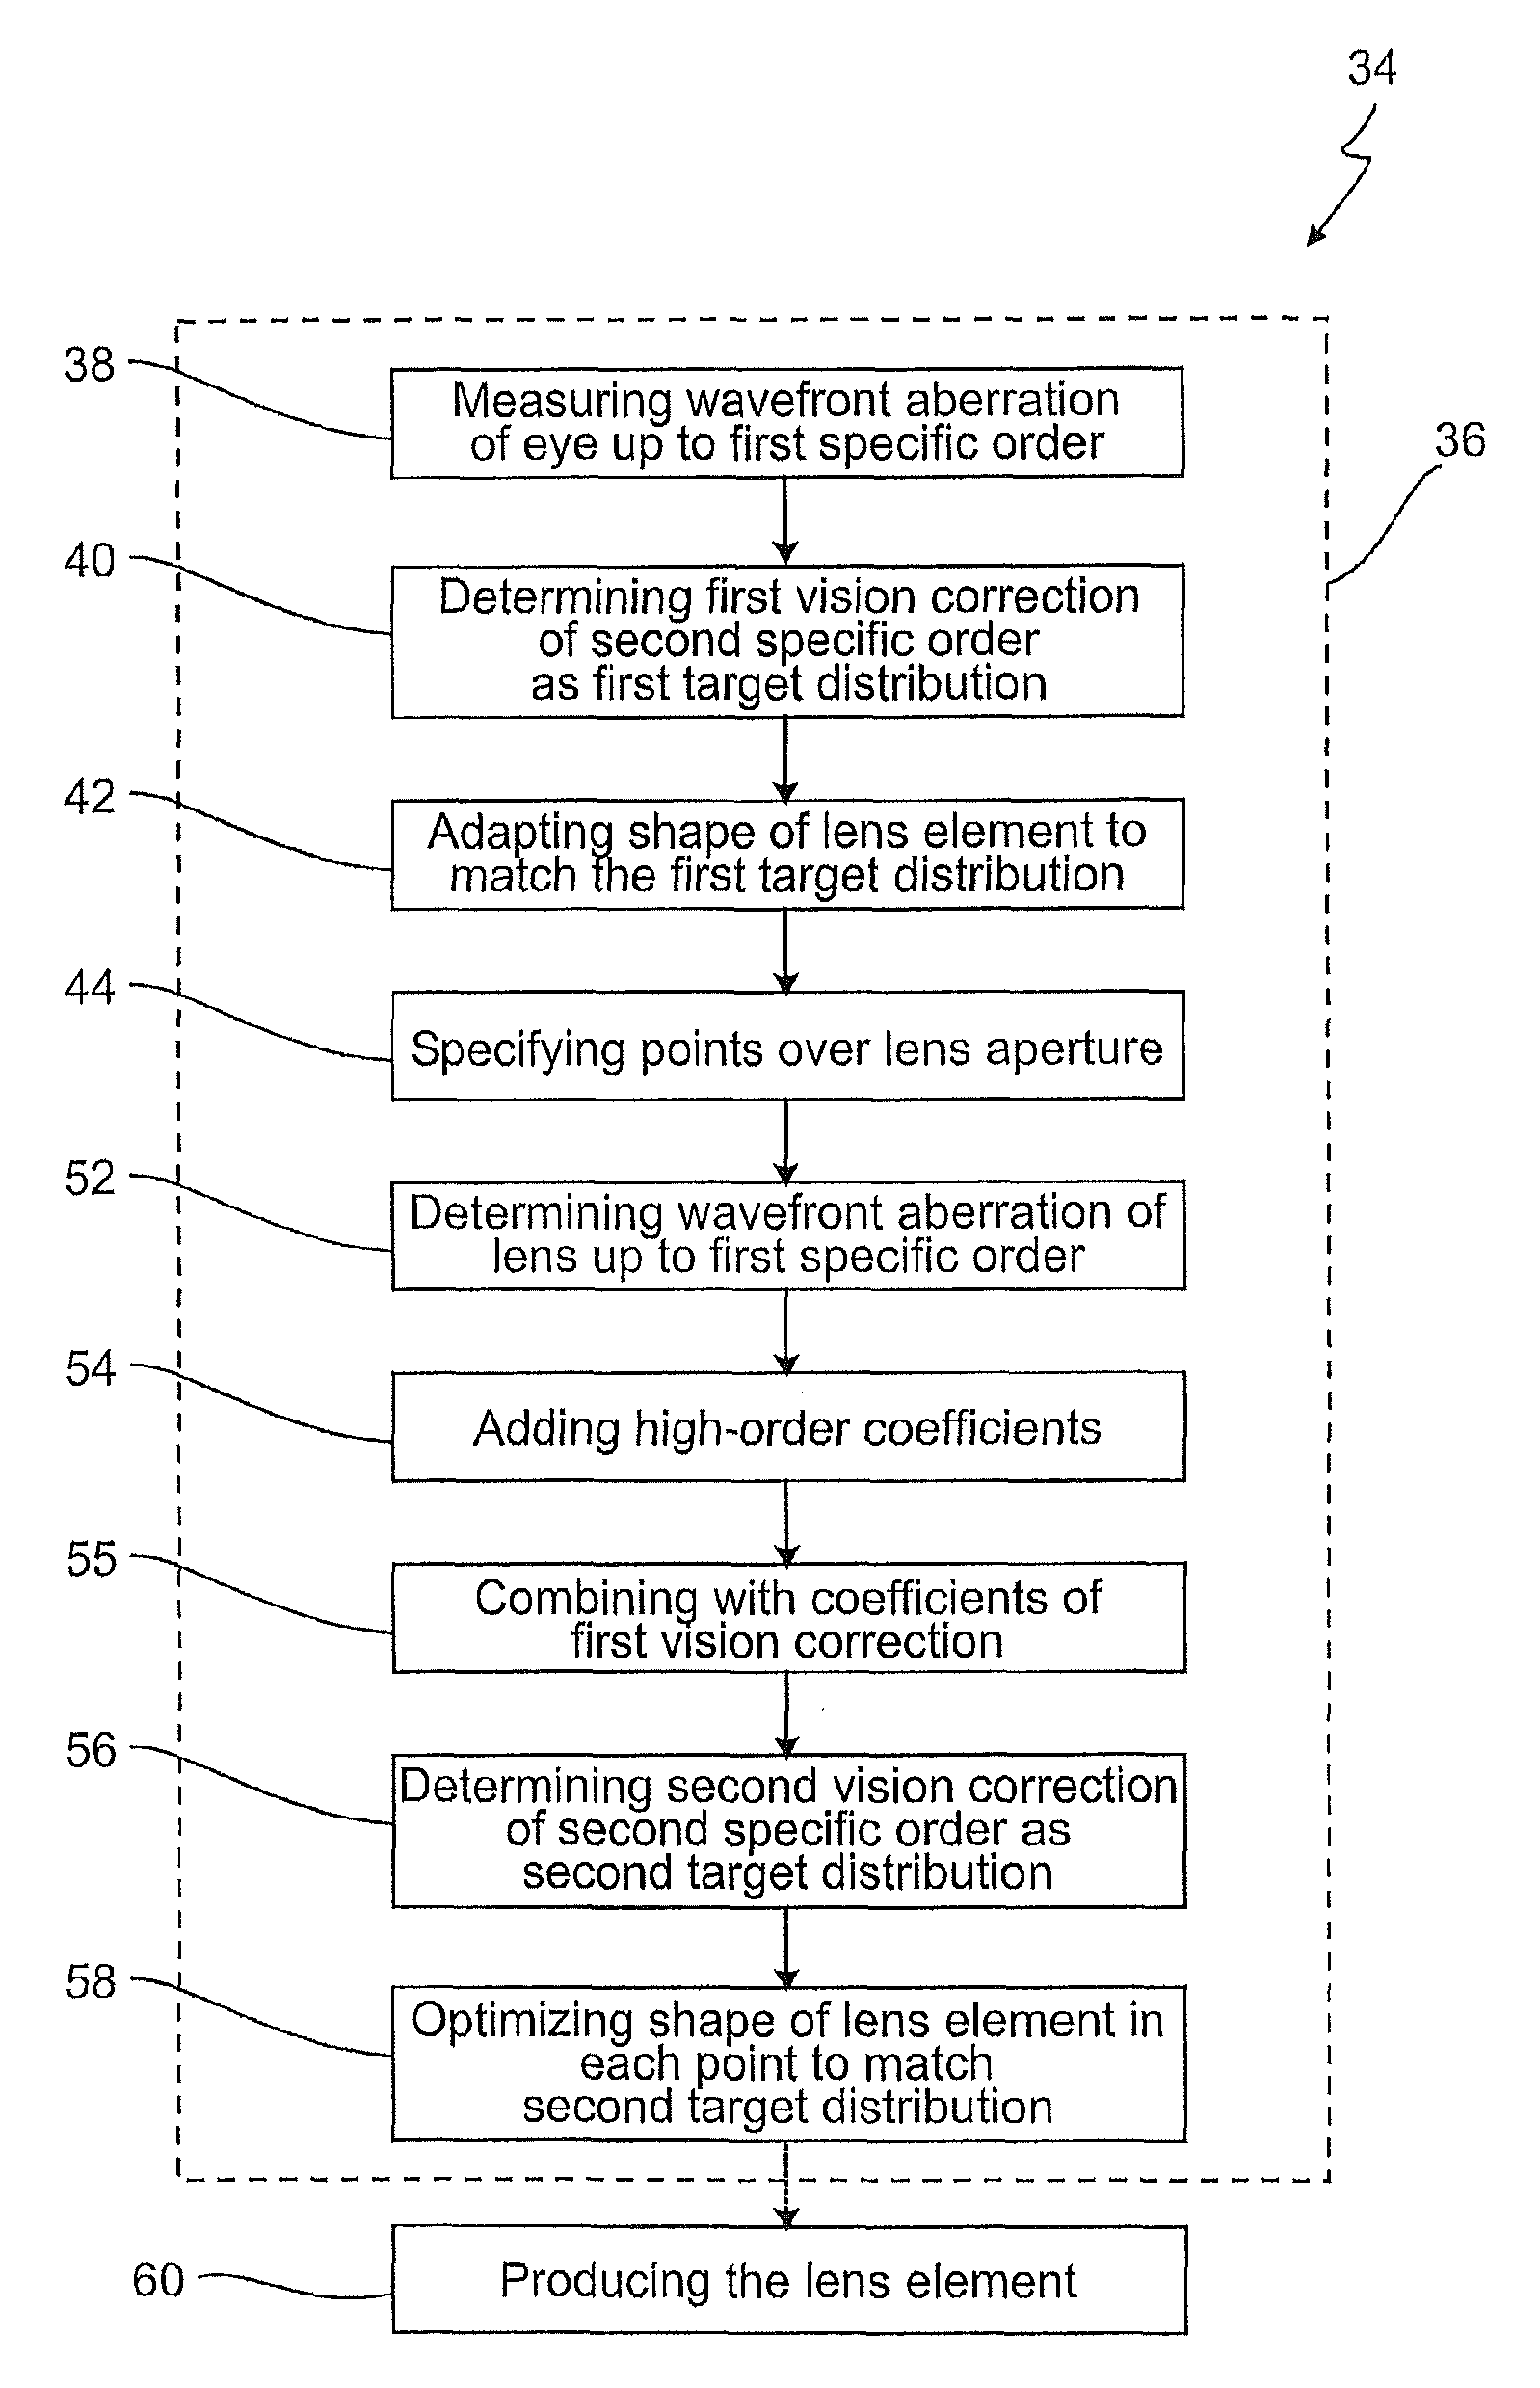 Method for optimizing a spectacle lens for the wavefront aberrations of an eye and lens